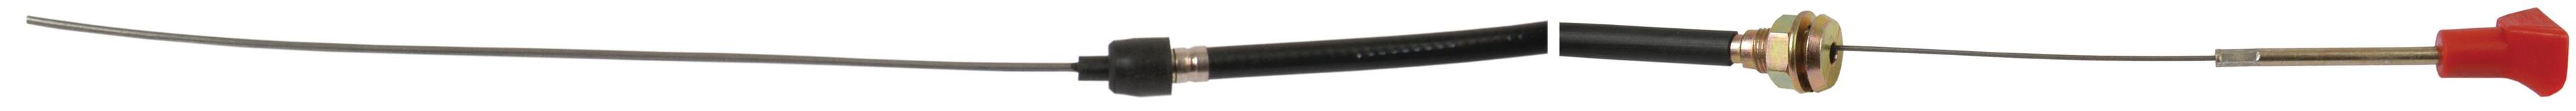 FORD NEW HOLLAND CABLE-STOP (1775MM) 65746